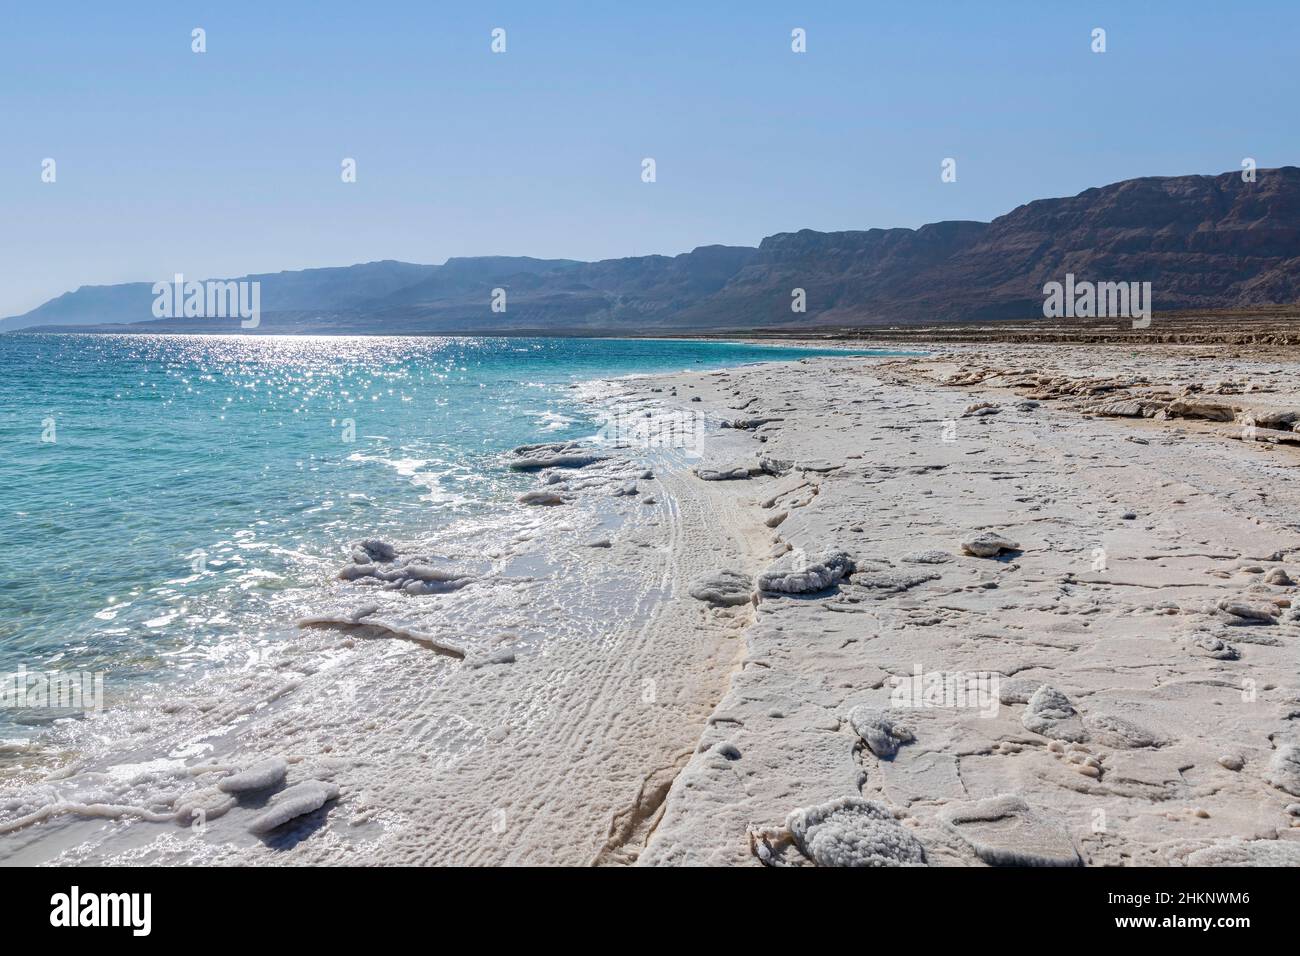 View of the mountains across the waters of the Dead Sea from the shore covered with salt formations. Stock Photo